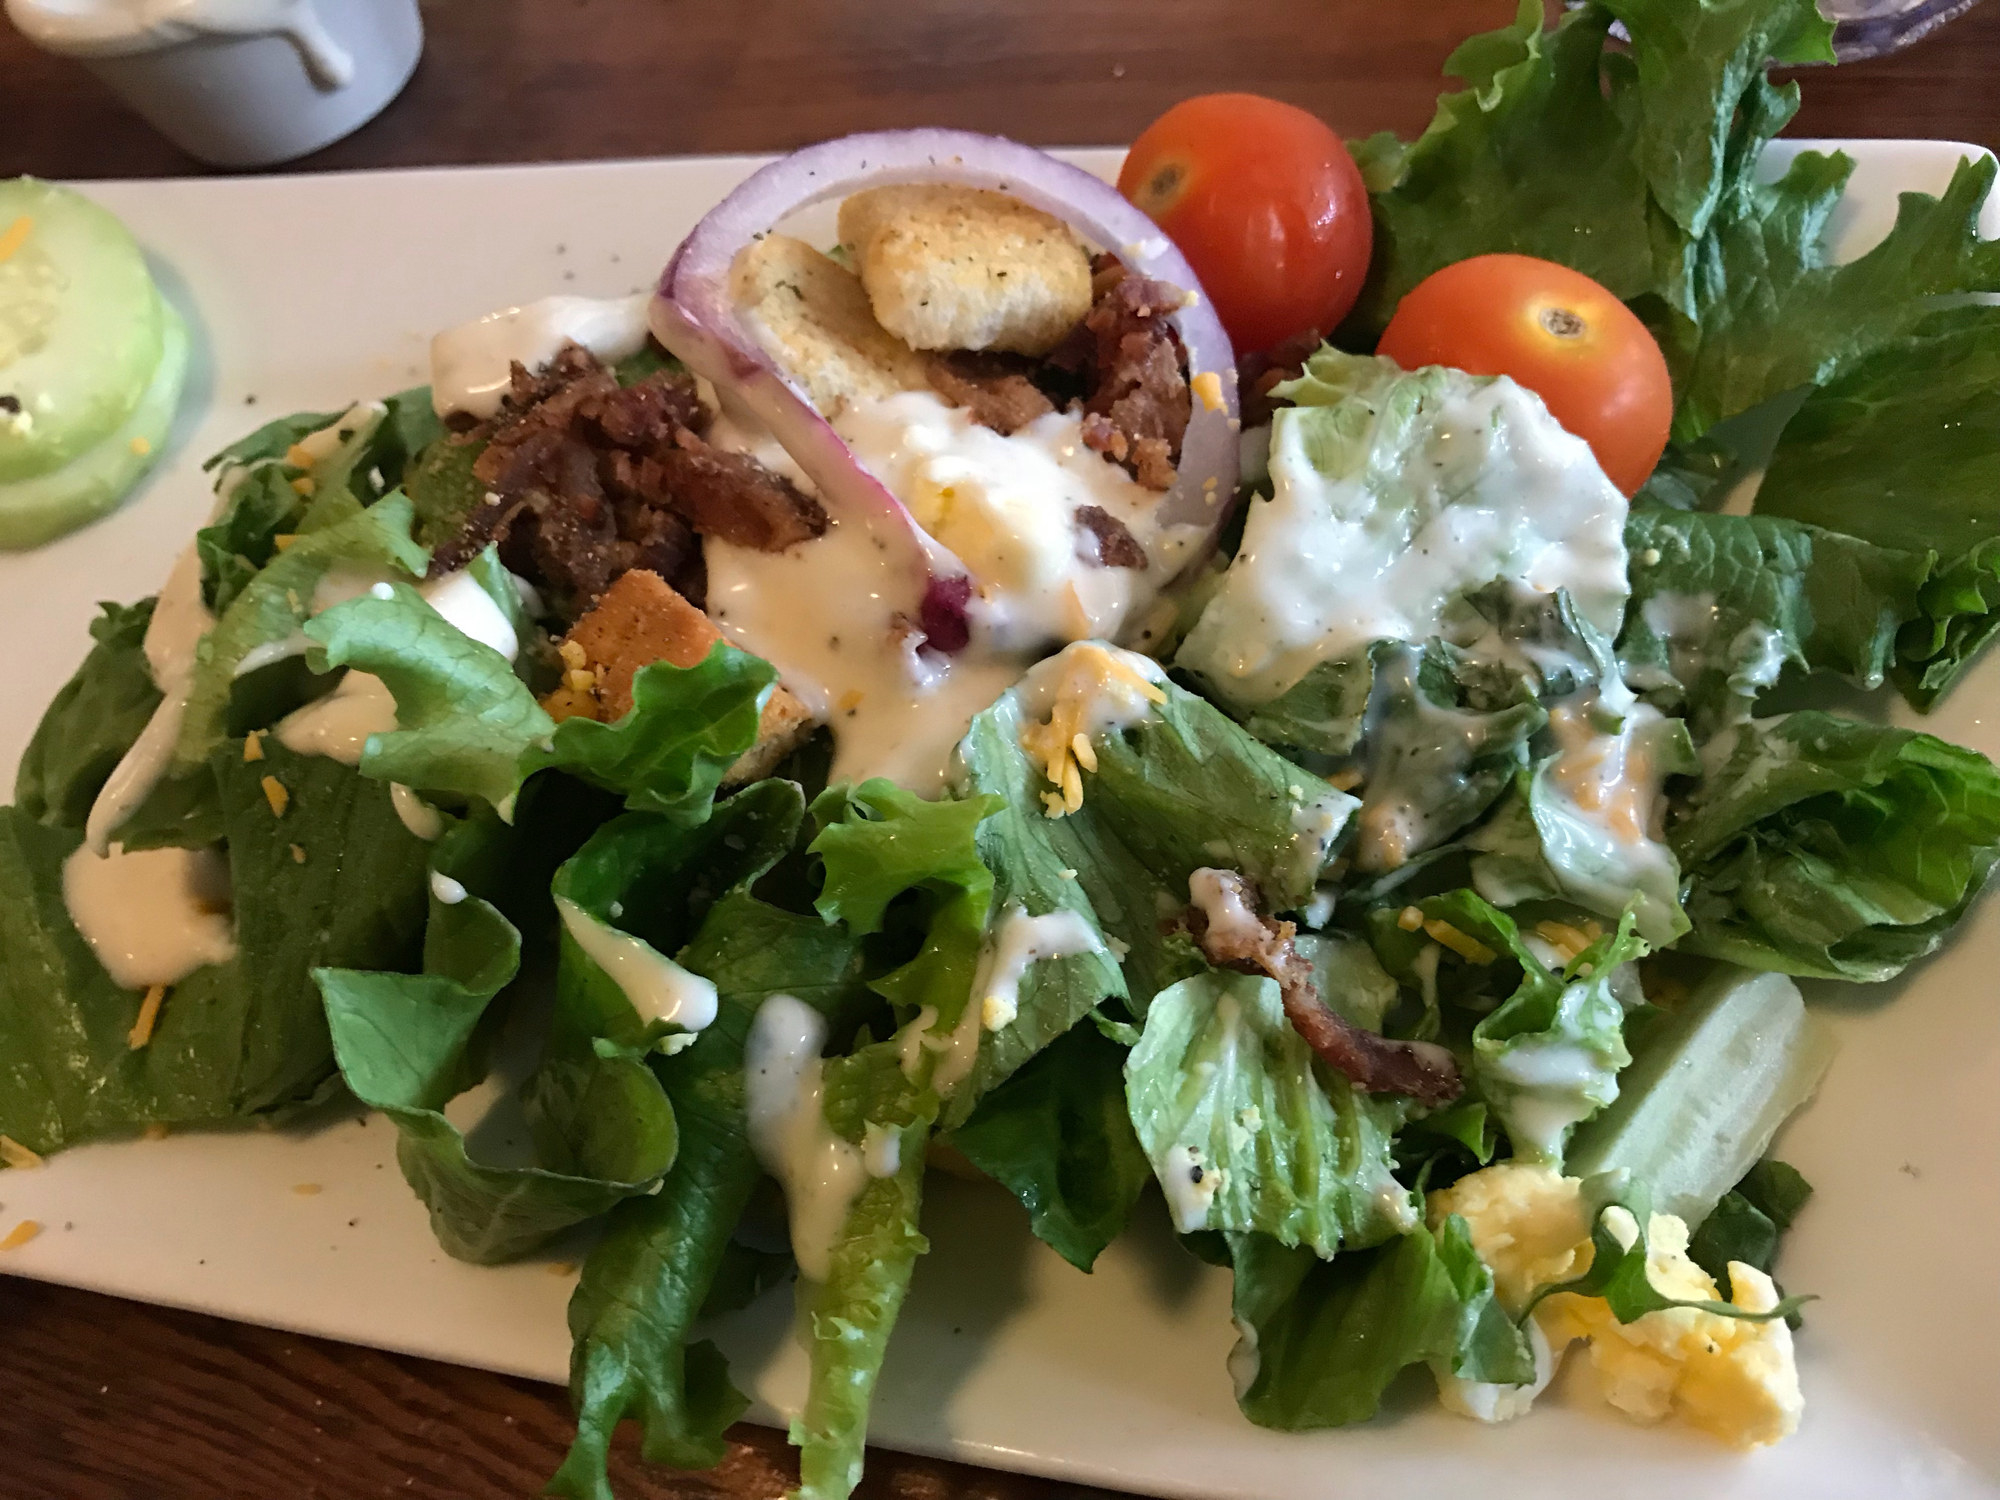 Salad with tomatoes and bacon, croutons, and ranch dressing.